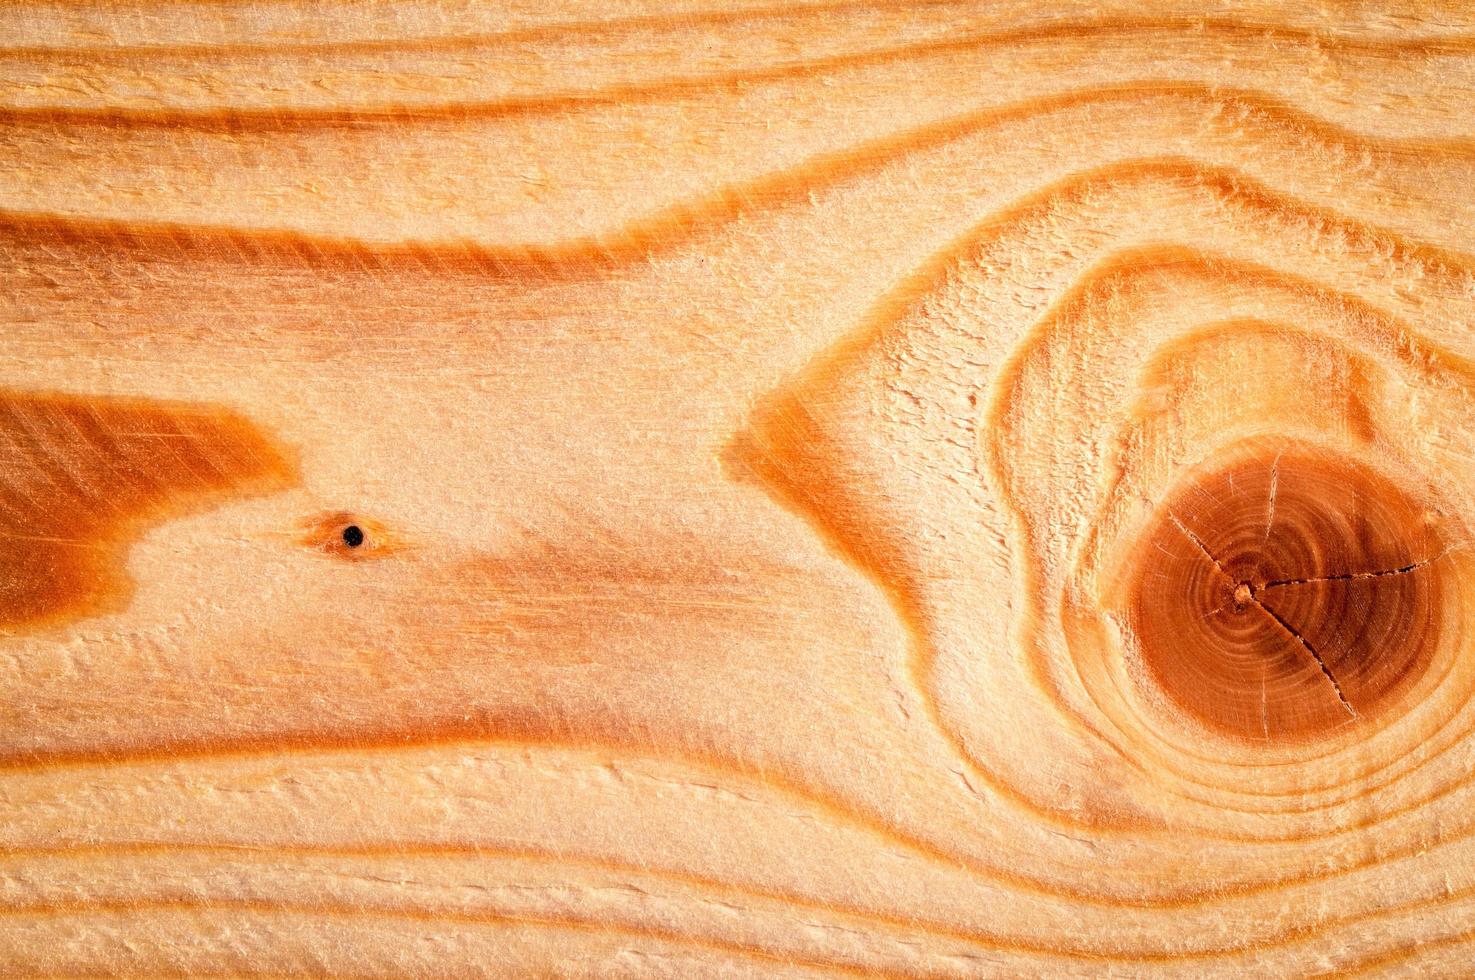 Detail of tree rings and knots on wood photo